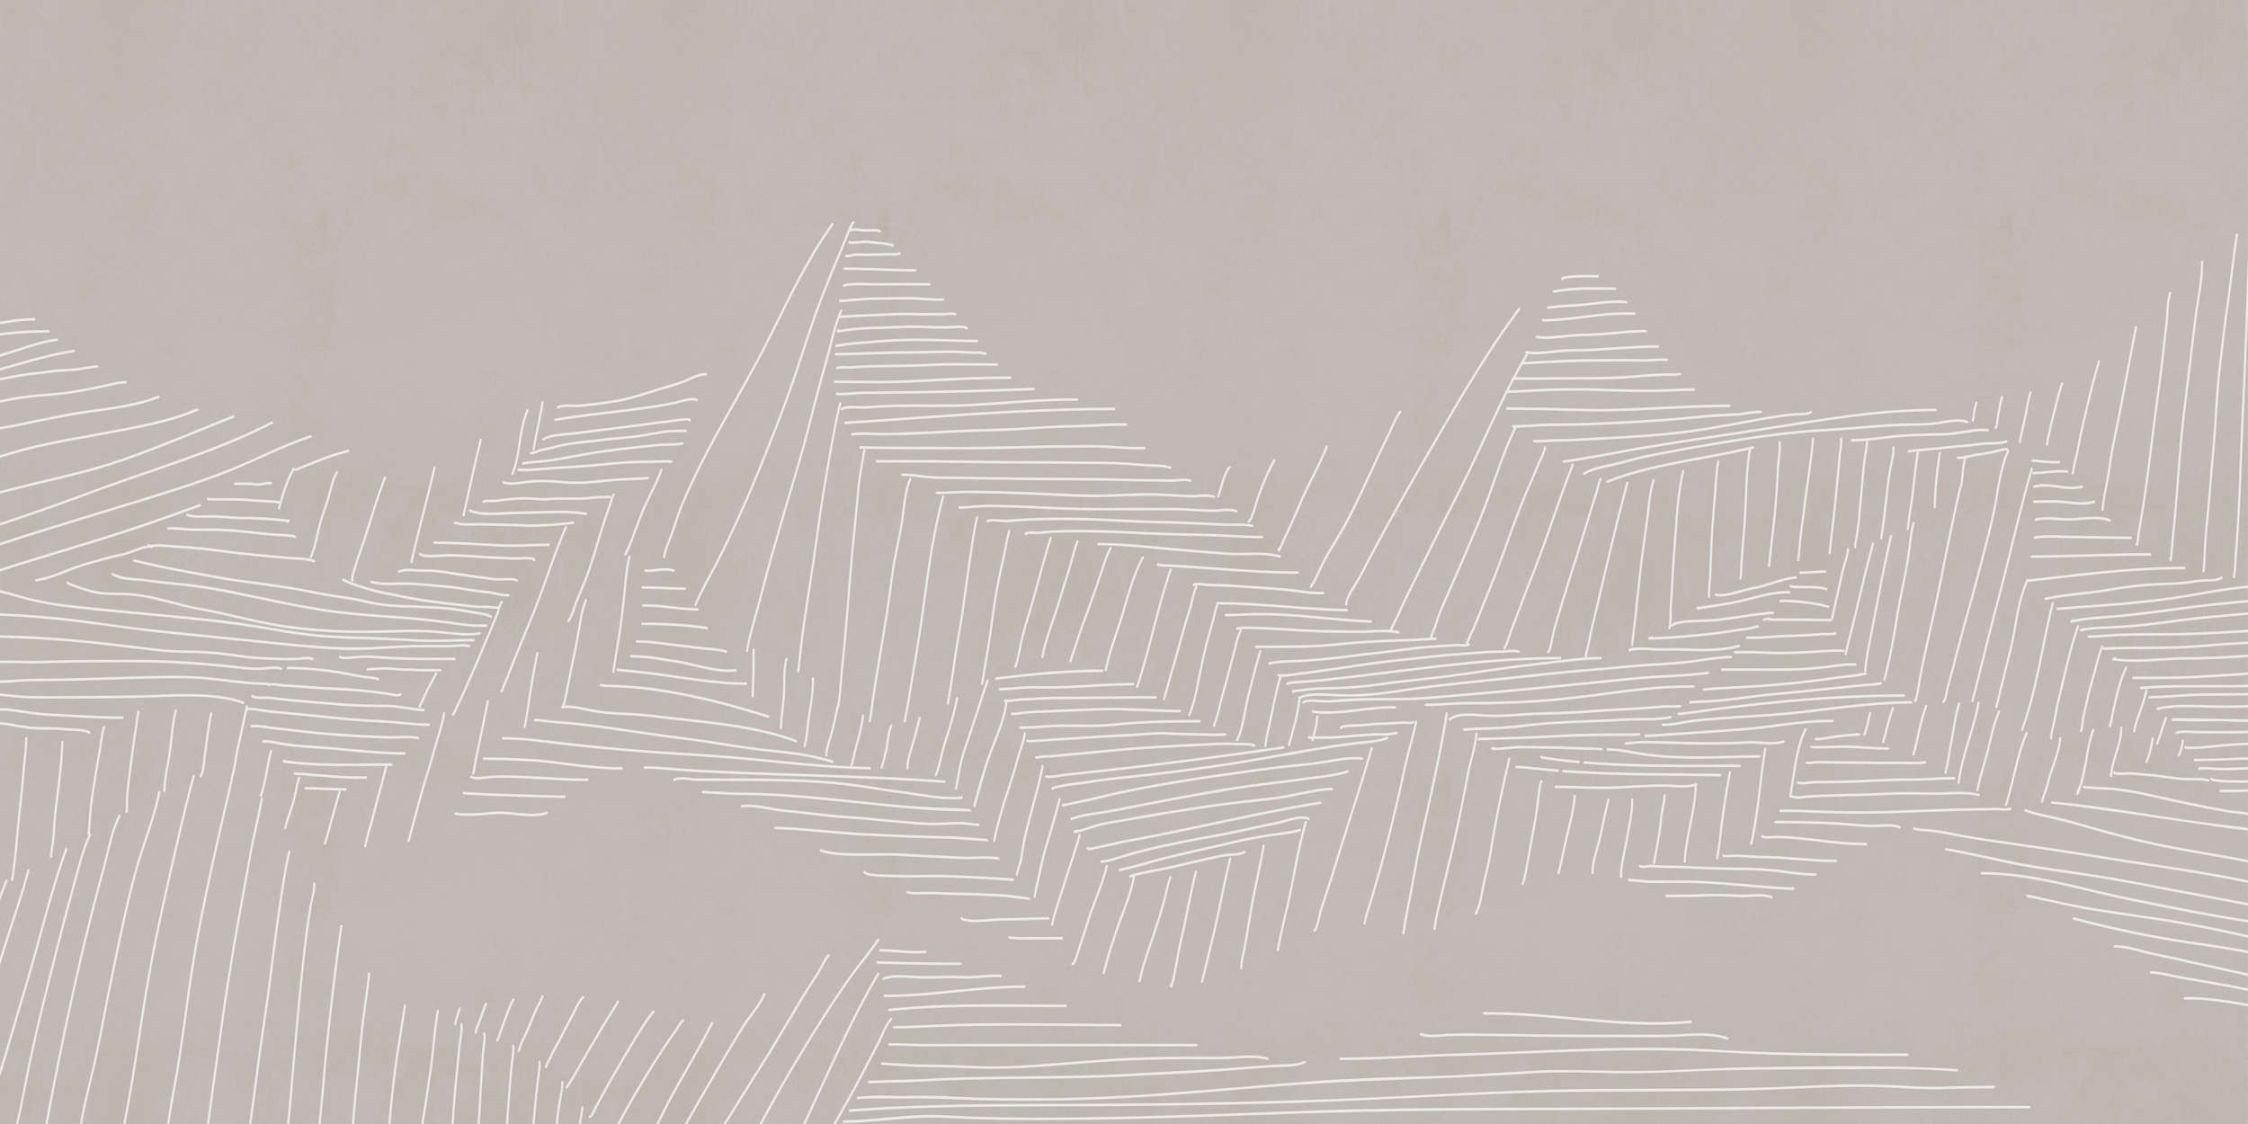             Photo wallpaper »victor« - Mountain landscape with line pattern - Grey | Smooth, slightly pearly shimmering non-woven fabric
        